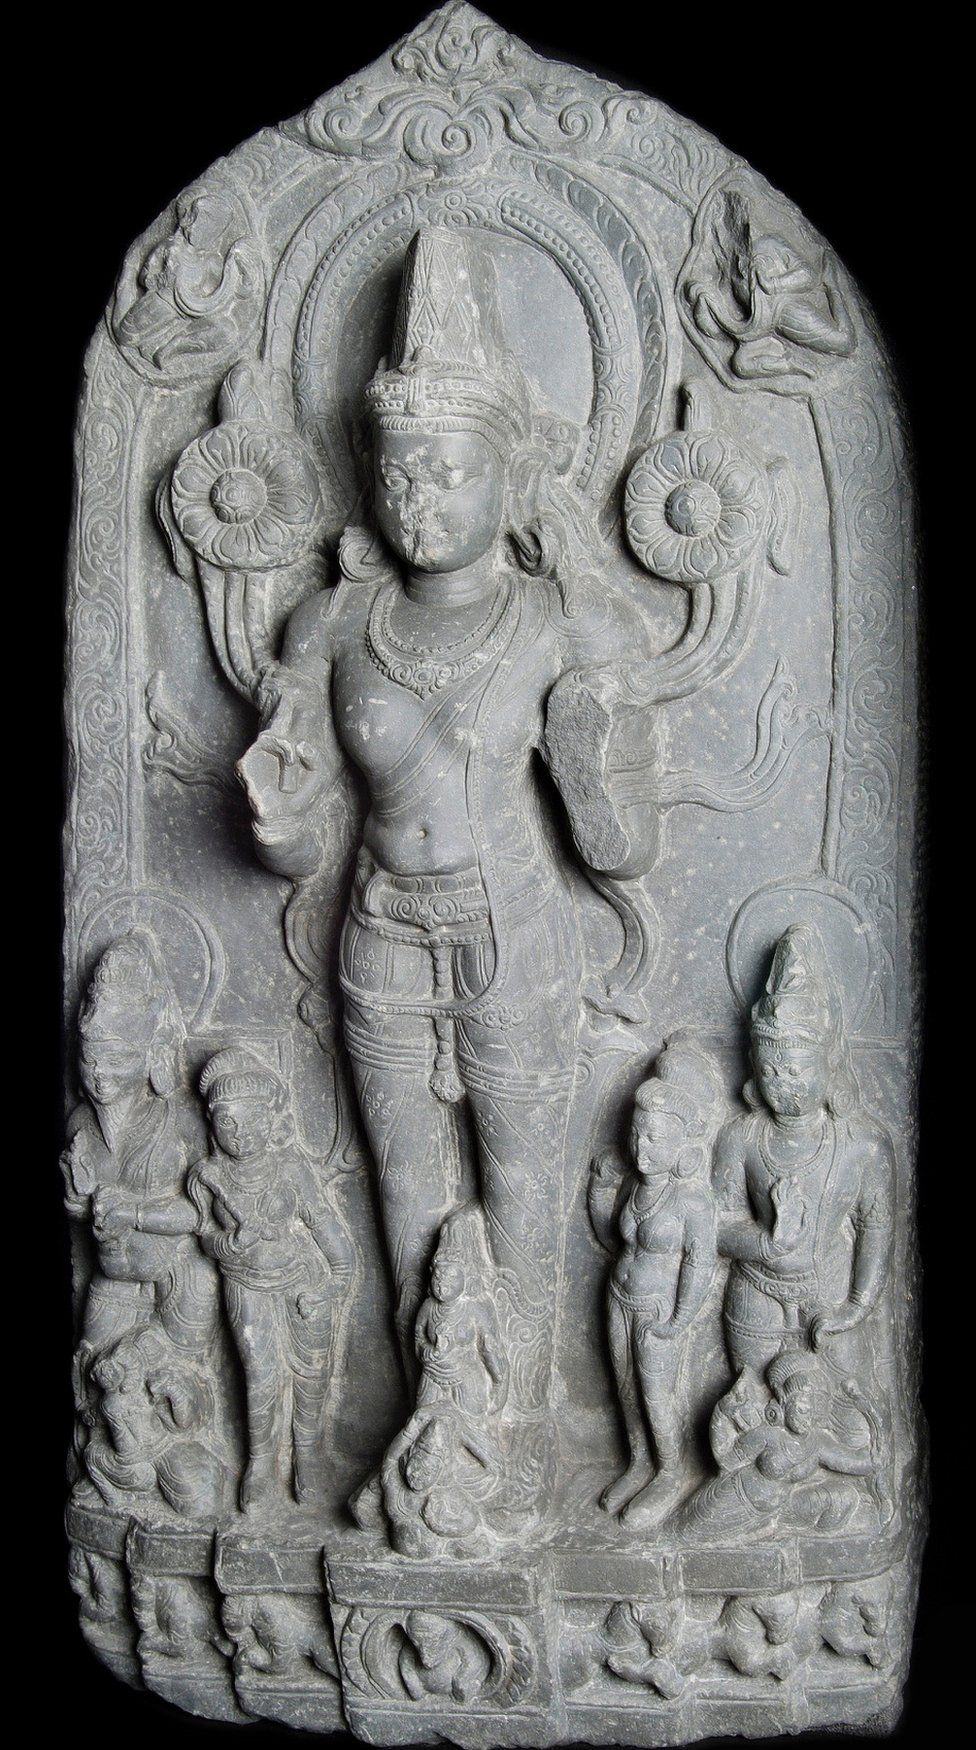 Stele carved from black chlorite representing Surya, the Hindu deity of the sun